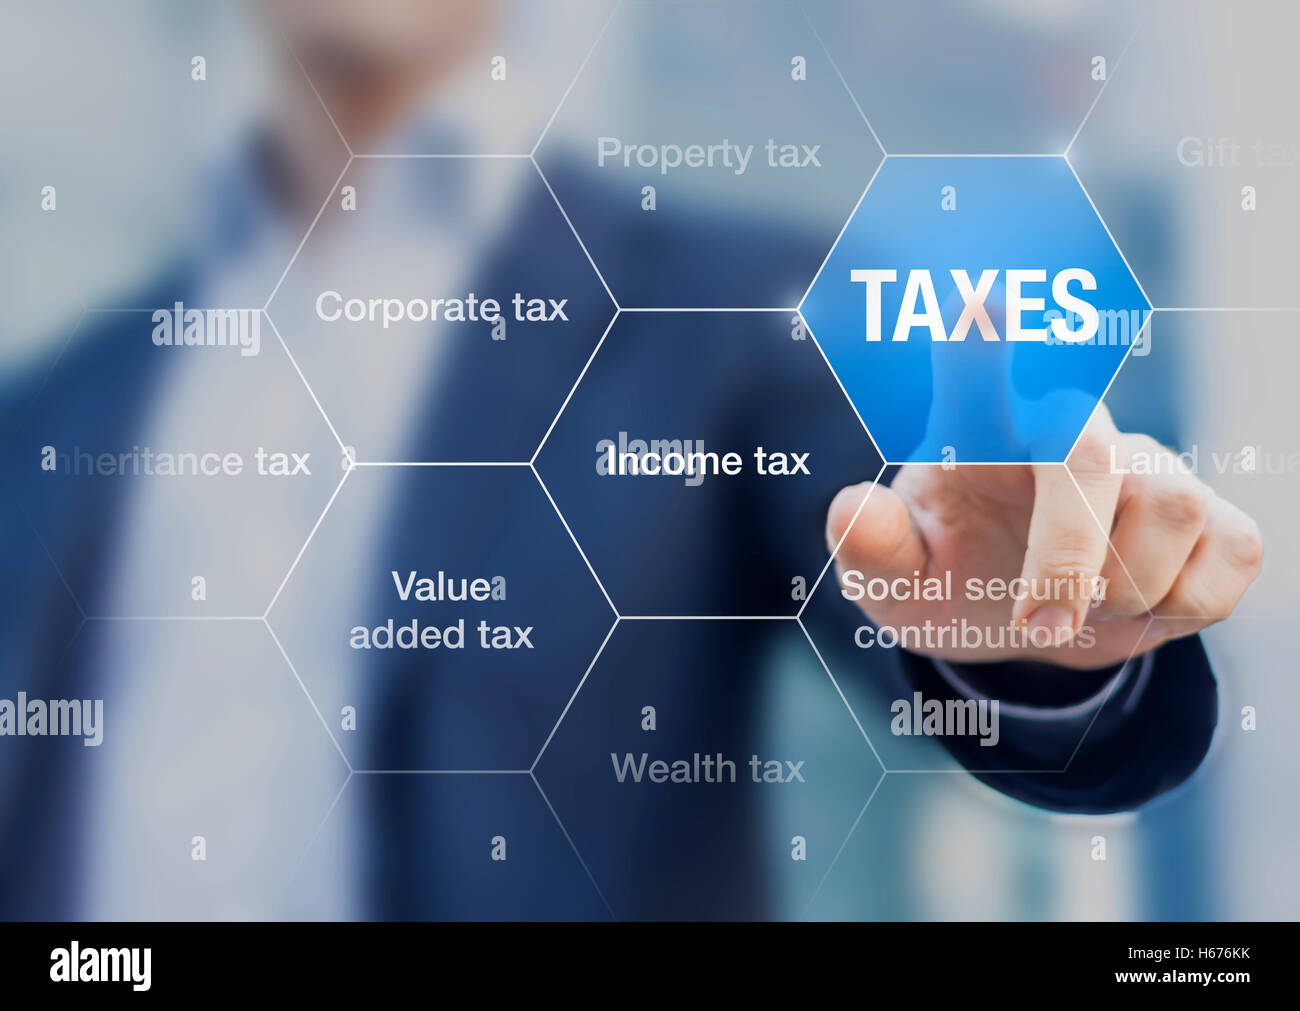 Businessman showing concept of taxes paid by individuals and corporations such as vat, income and wealth tax Stock Photo